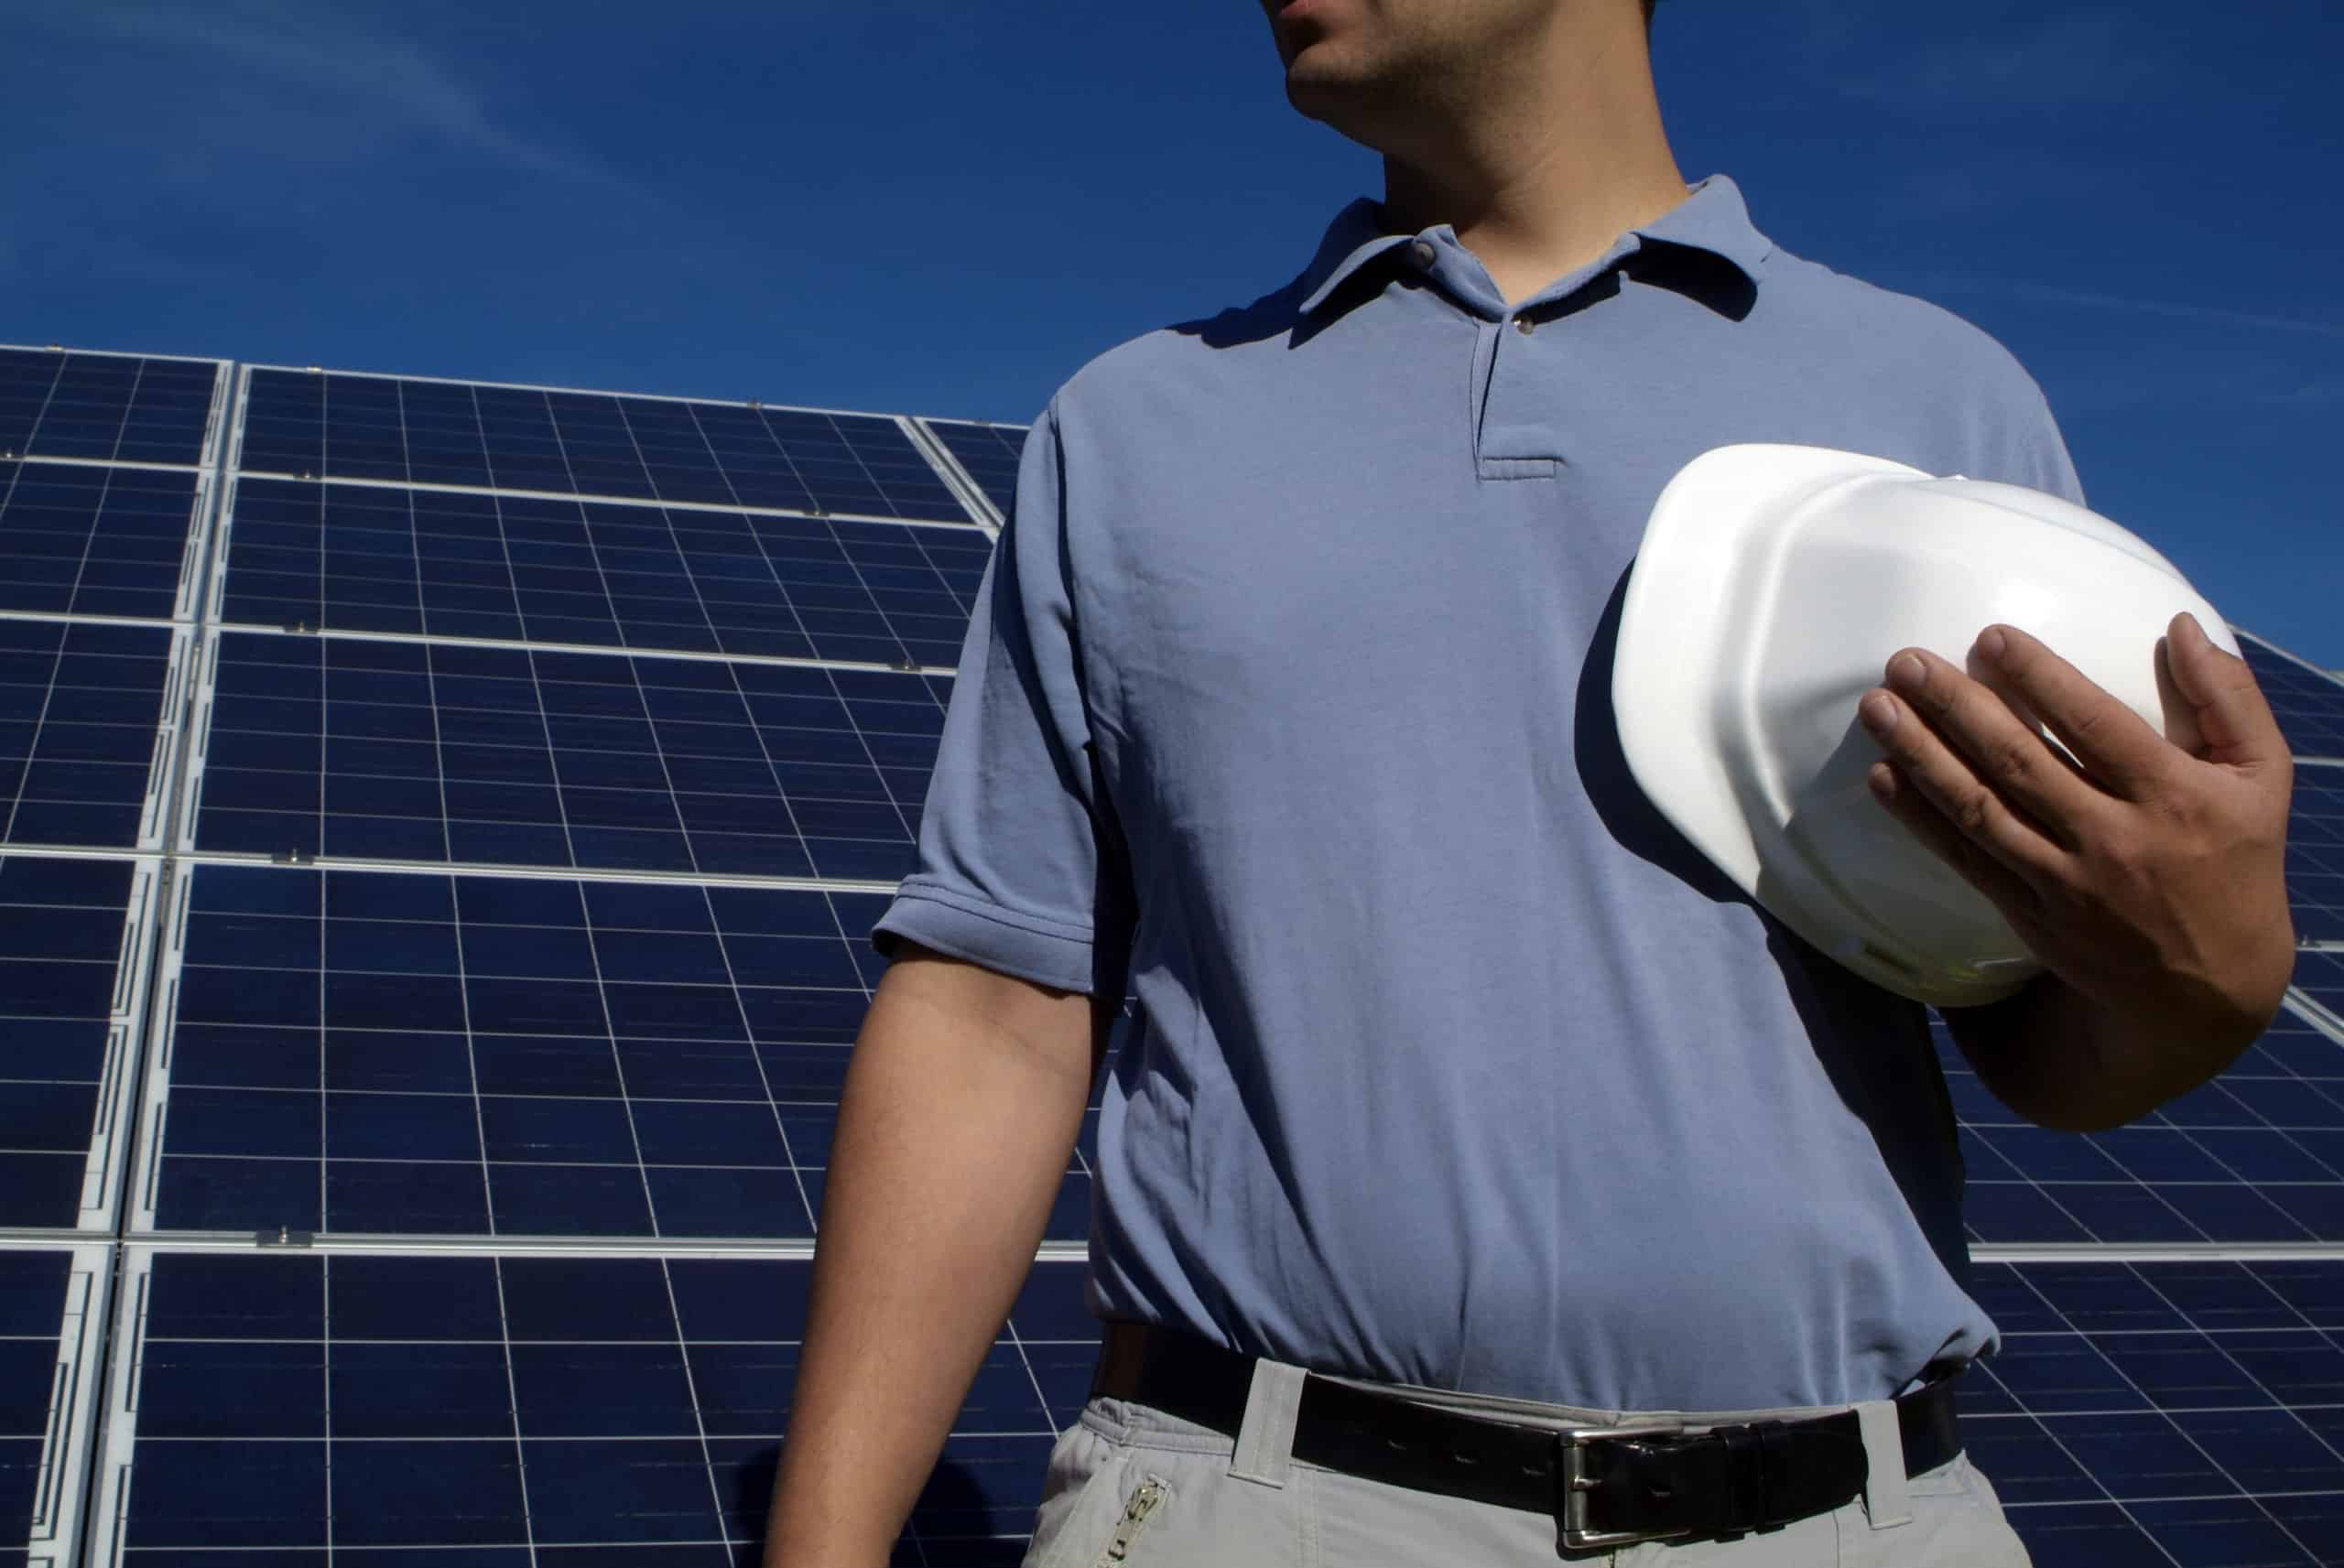 male contractor holding a white hard hat stands in front of large solar panels